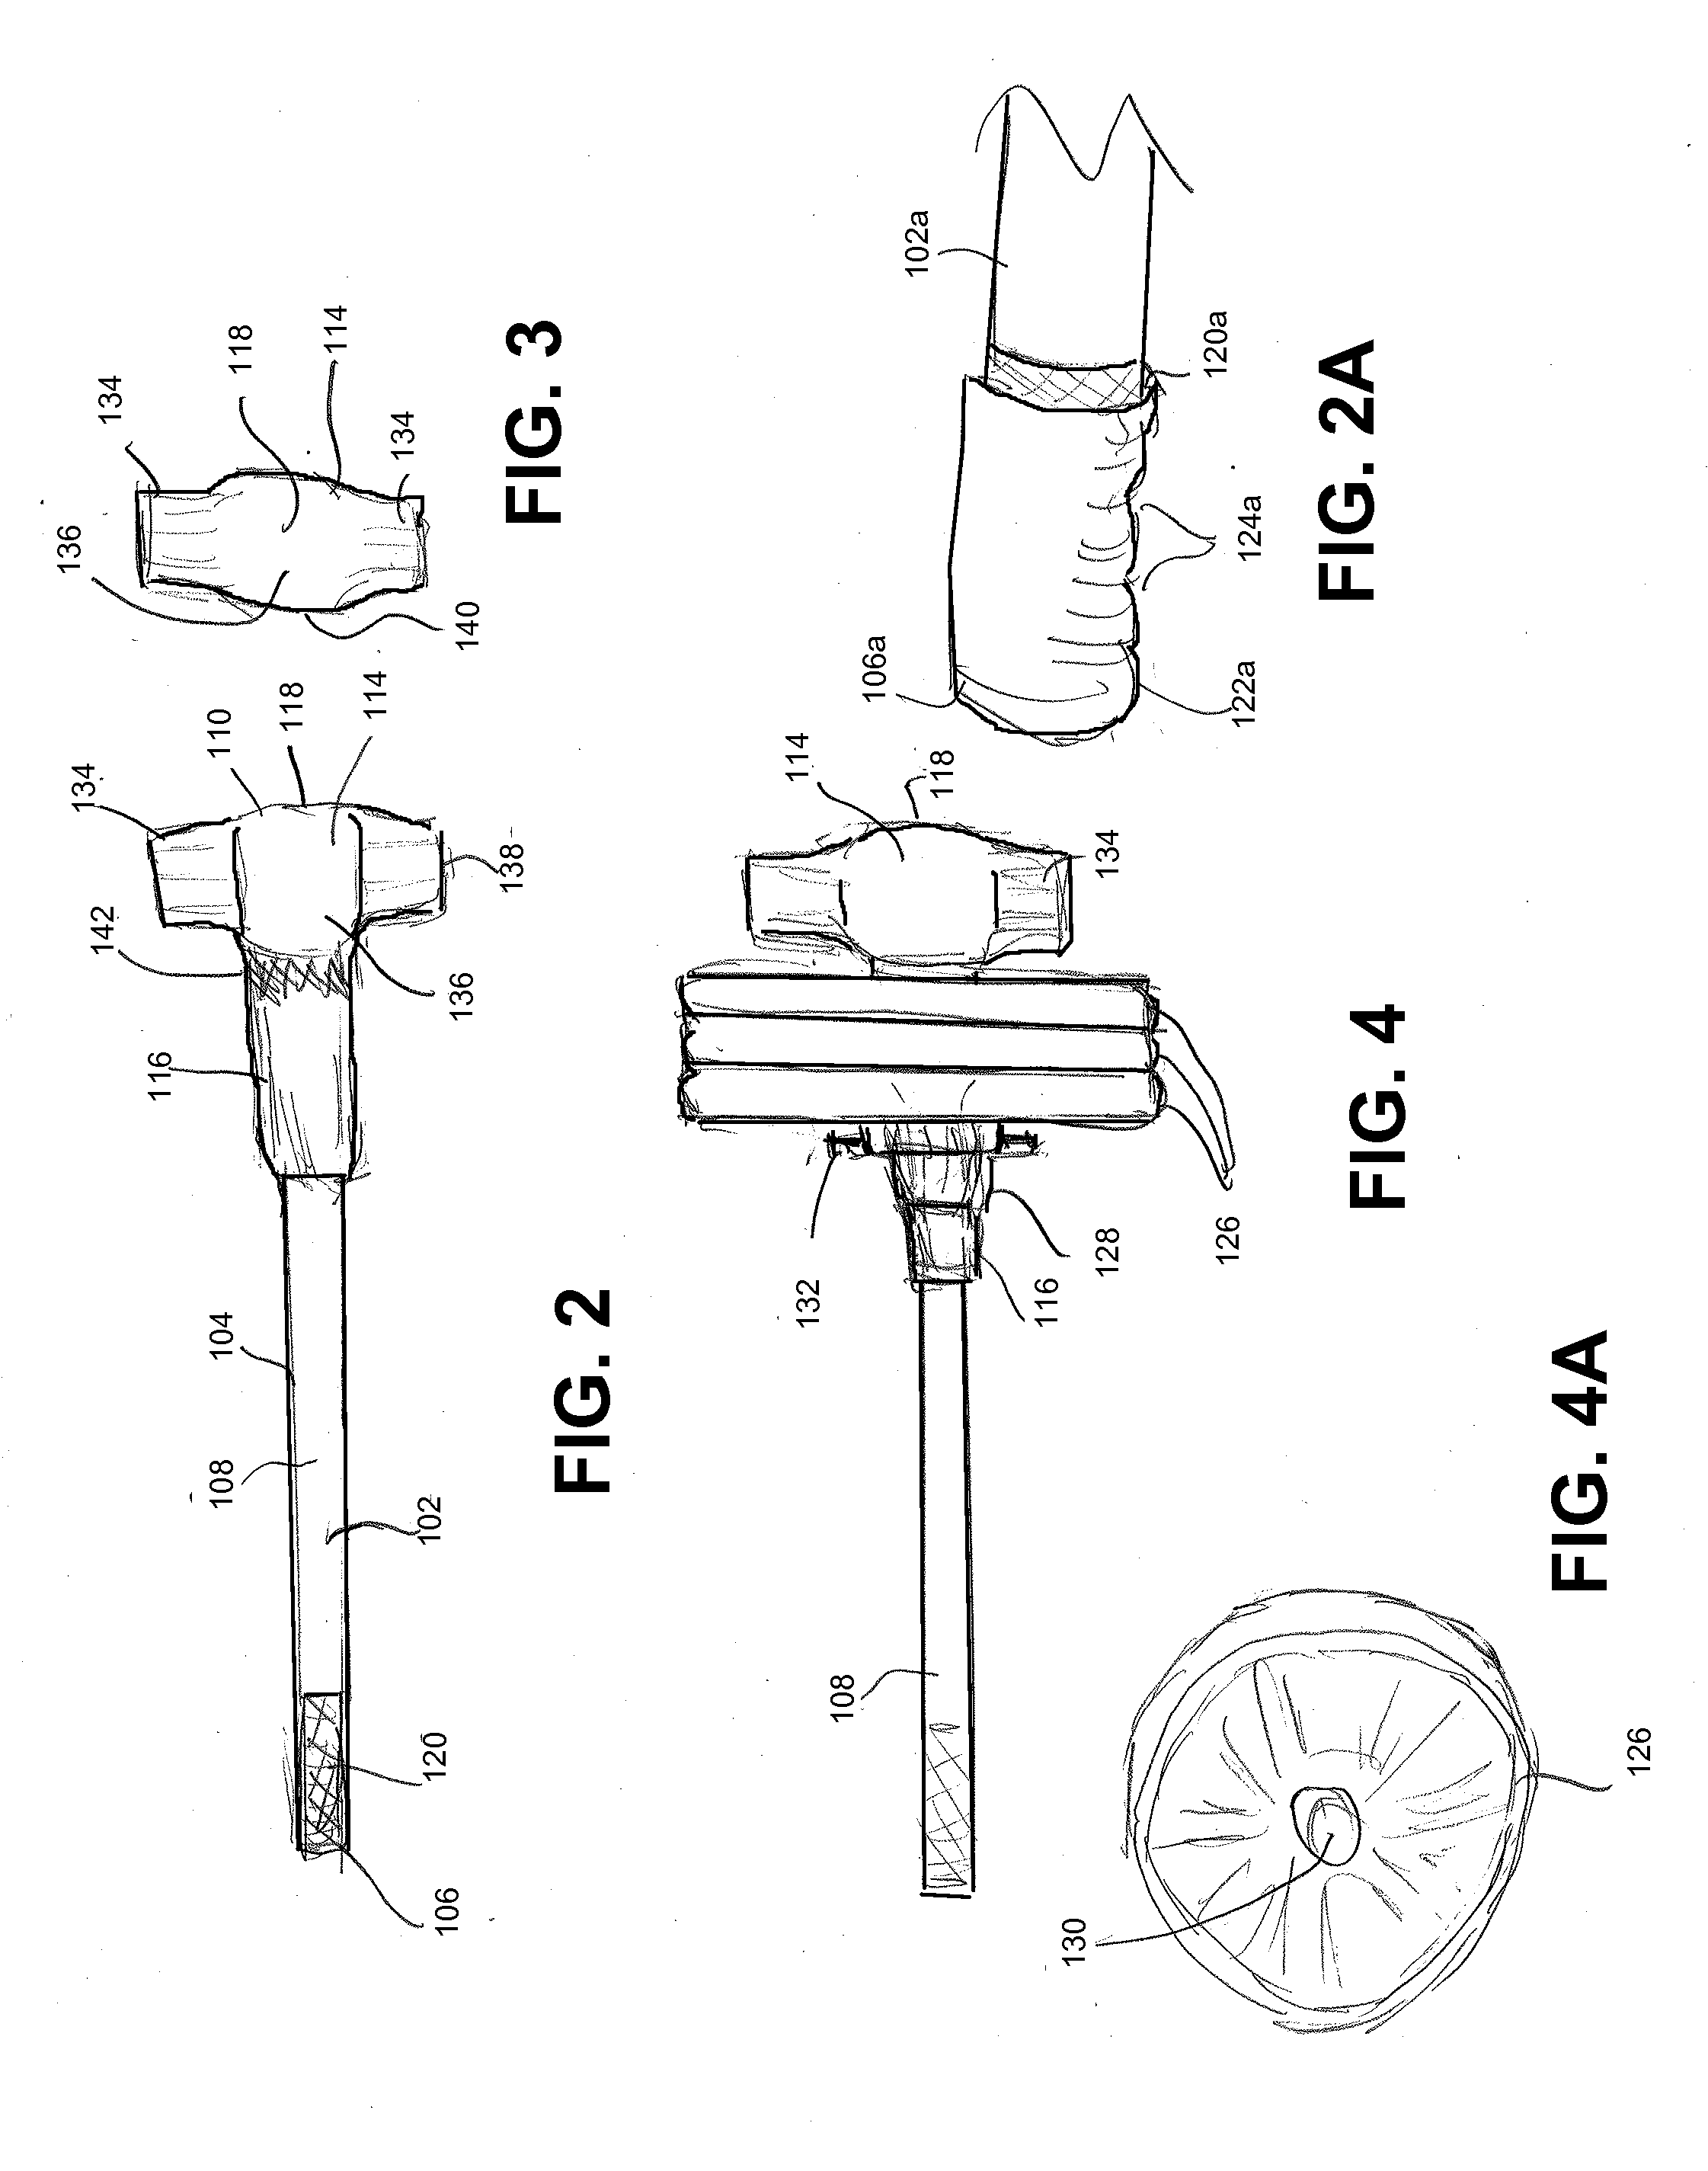 Variable Weight Hammer Useful as Exercise Apparatus